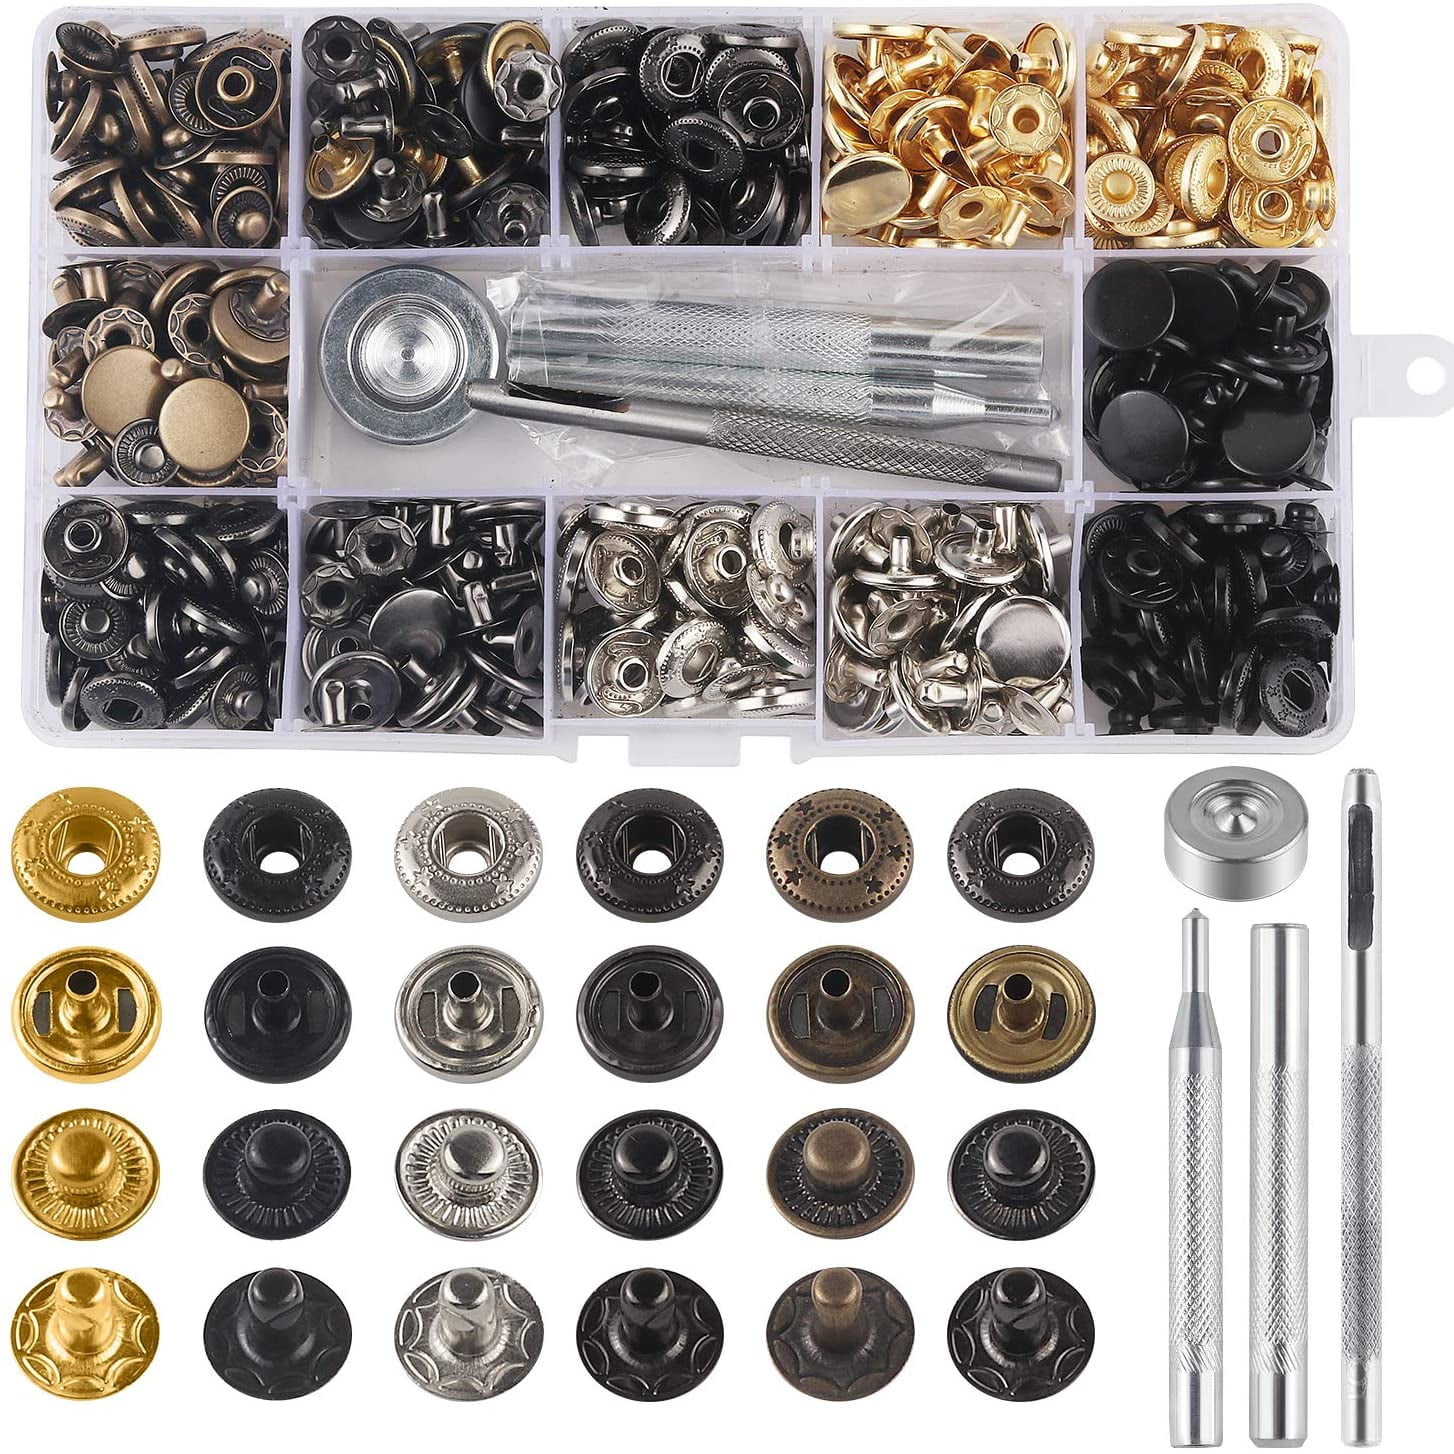 50 Metal Press Buttons,Snaps Fasteners Kit,Button Press Studs with 9 Pieces Fixing Tools for Trousers,Jackets,Jeans Pin Buttons 